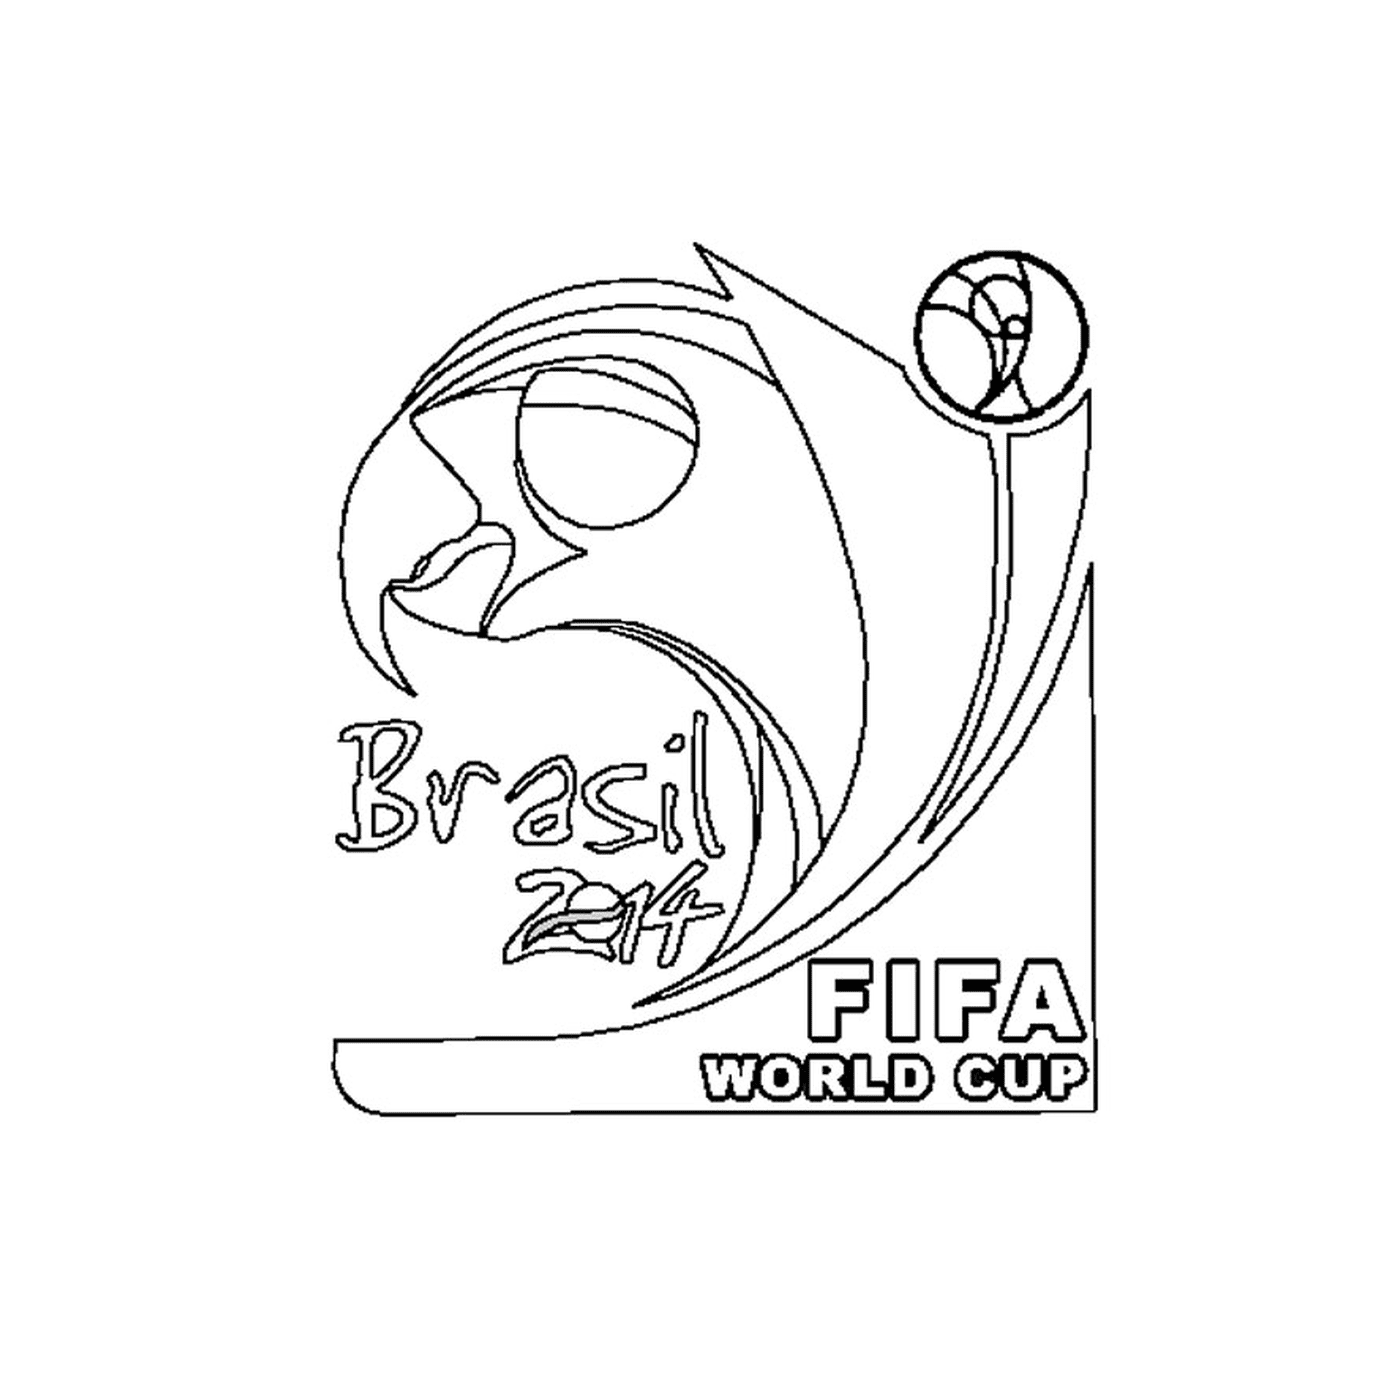  2014 World Cup 